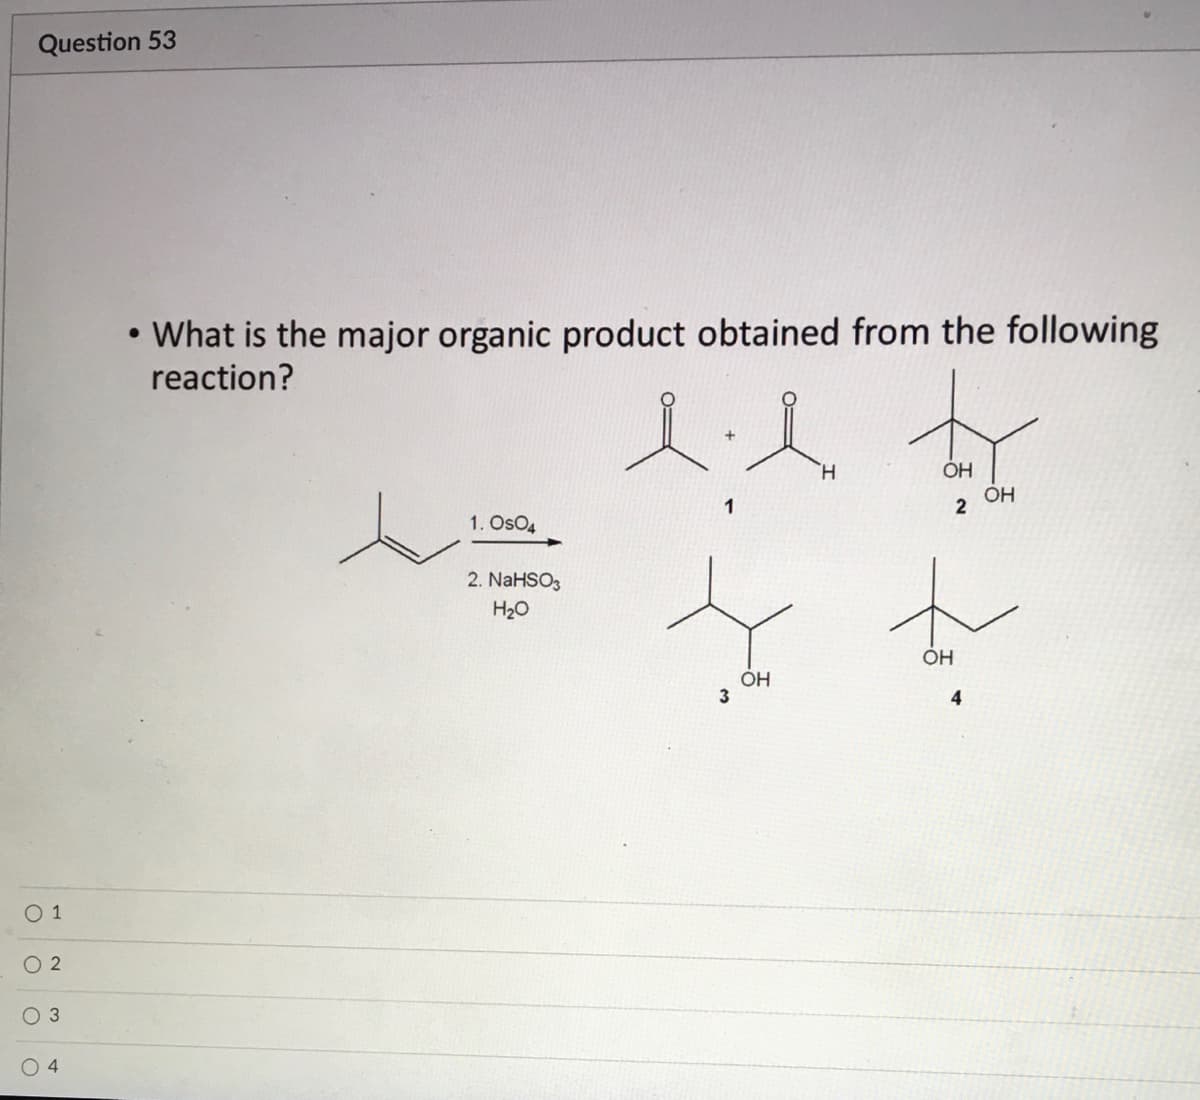 Question 53
• What is the major organic product obtained from the following
reaction?
人人女
H.
OH
OH
2
1. OsO4
2. NaHSO3
H20
ÓH
3
4
3
O 4
O o o o
